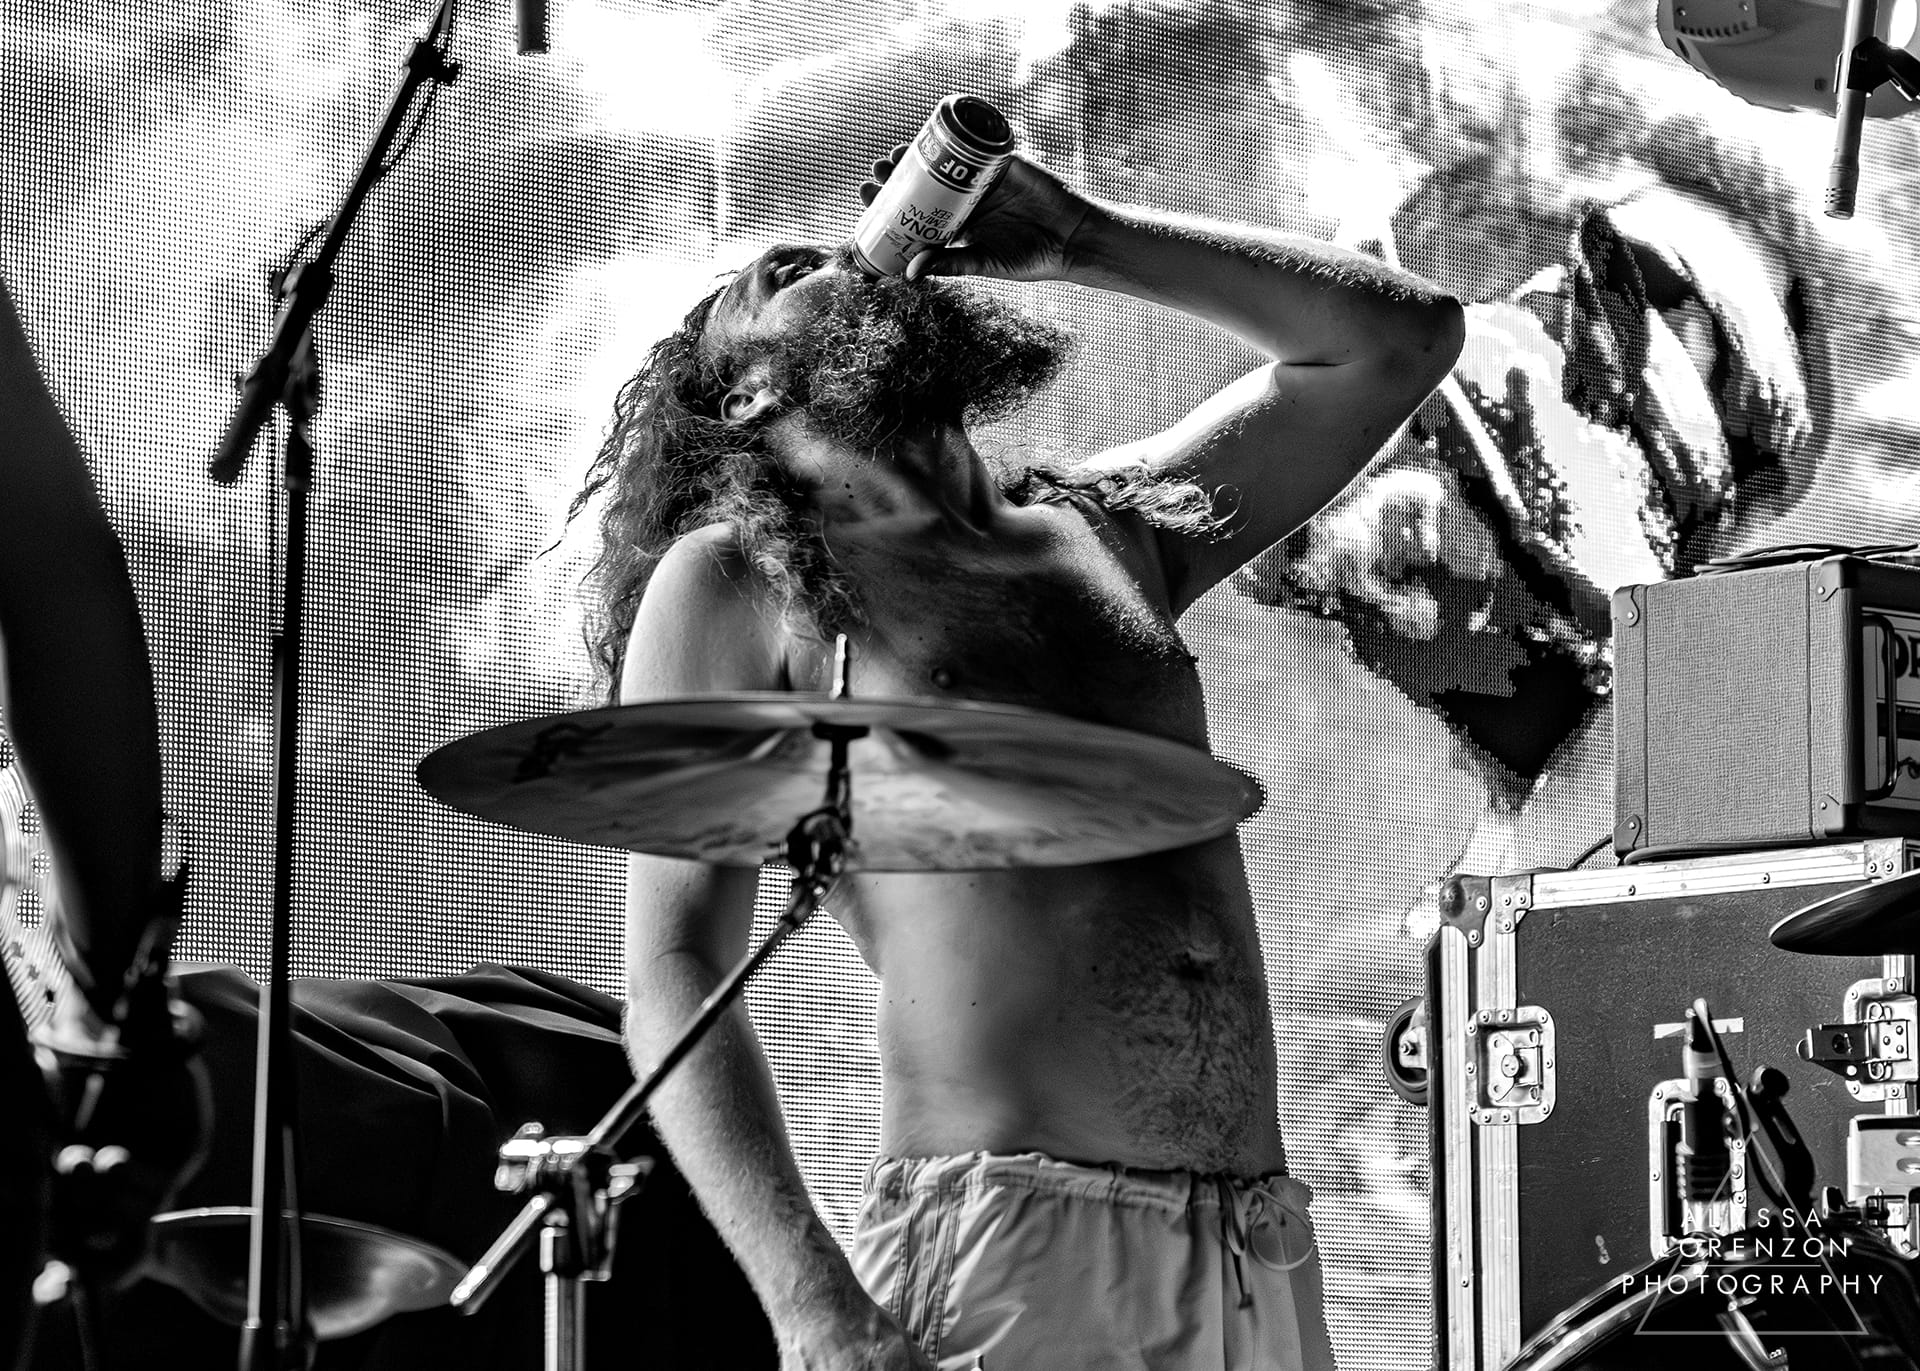 Inter Arma's T.J. Childers on 'New Heaven,' Hard Work, and Hallucinogens